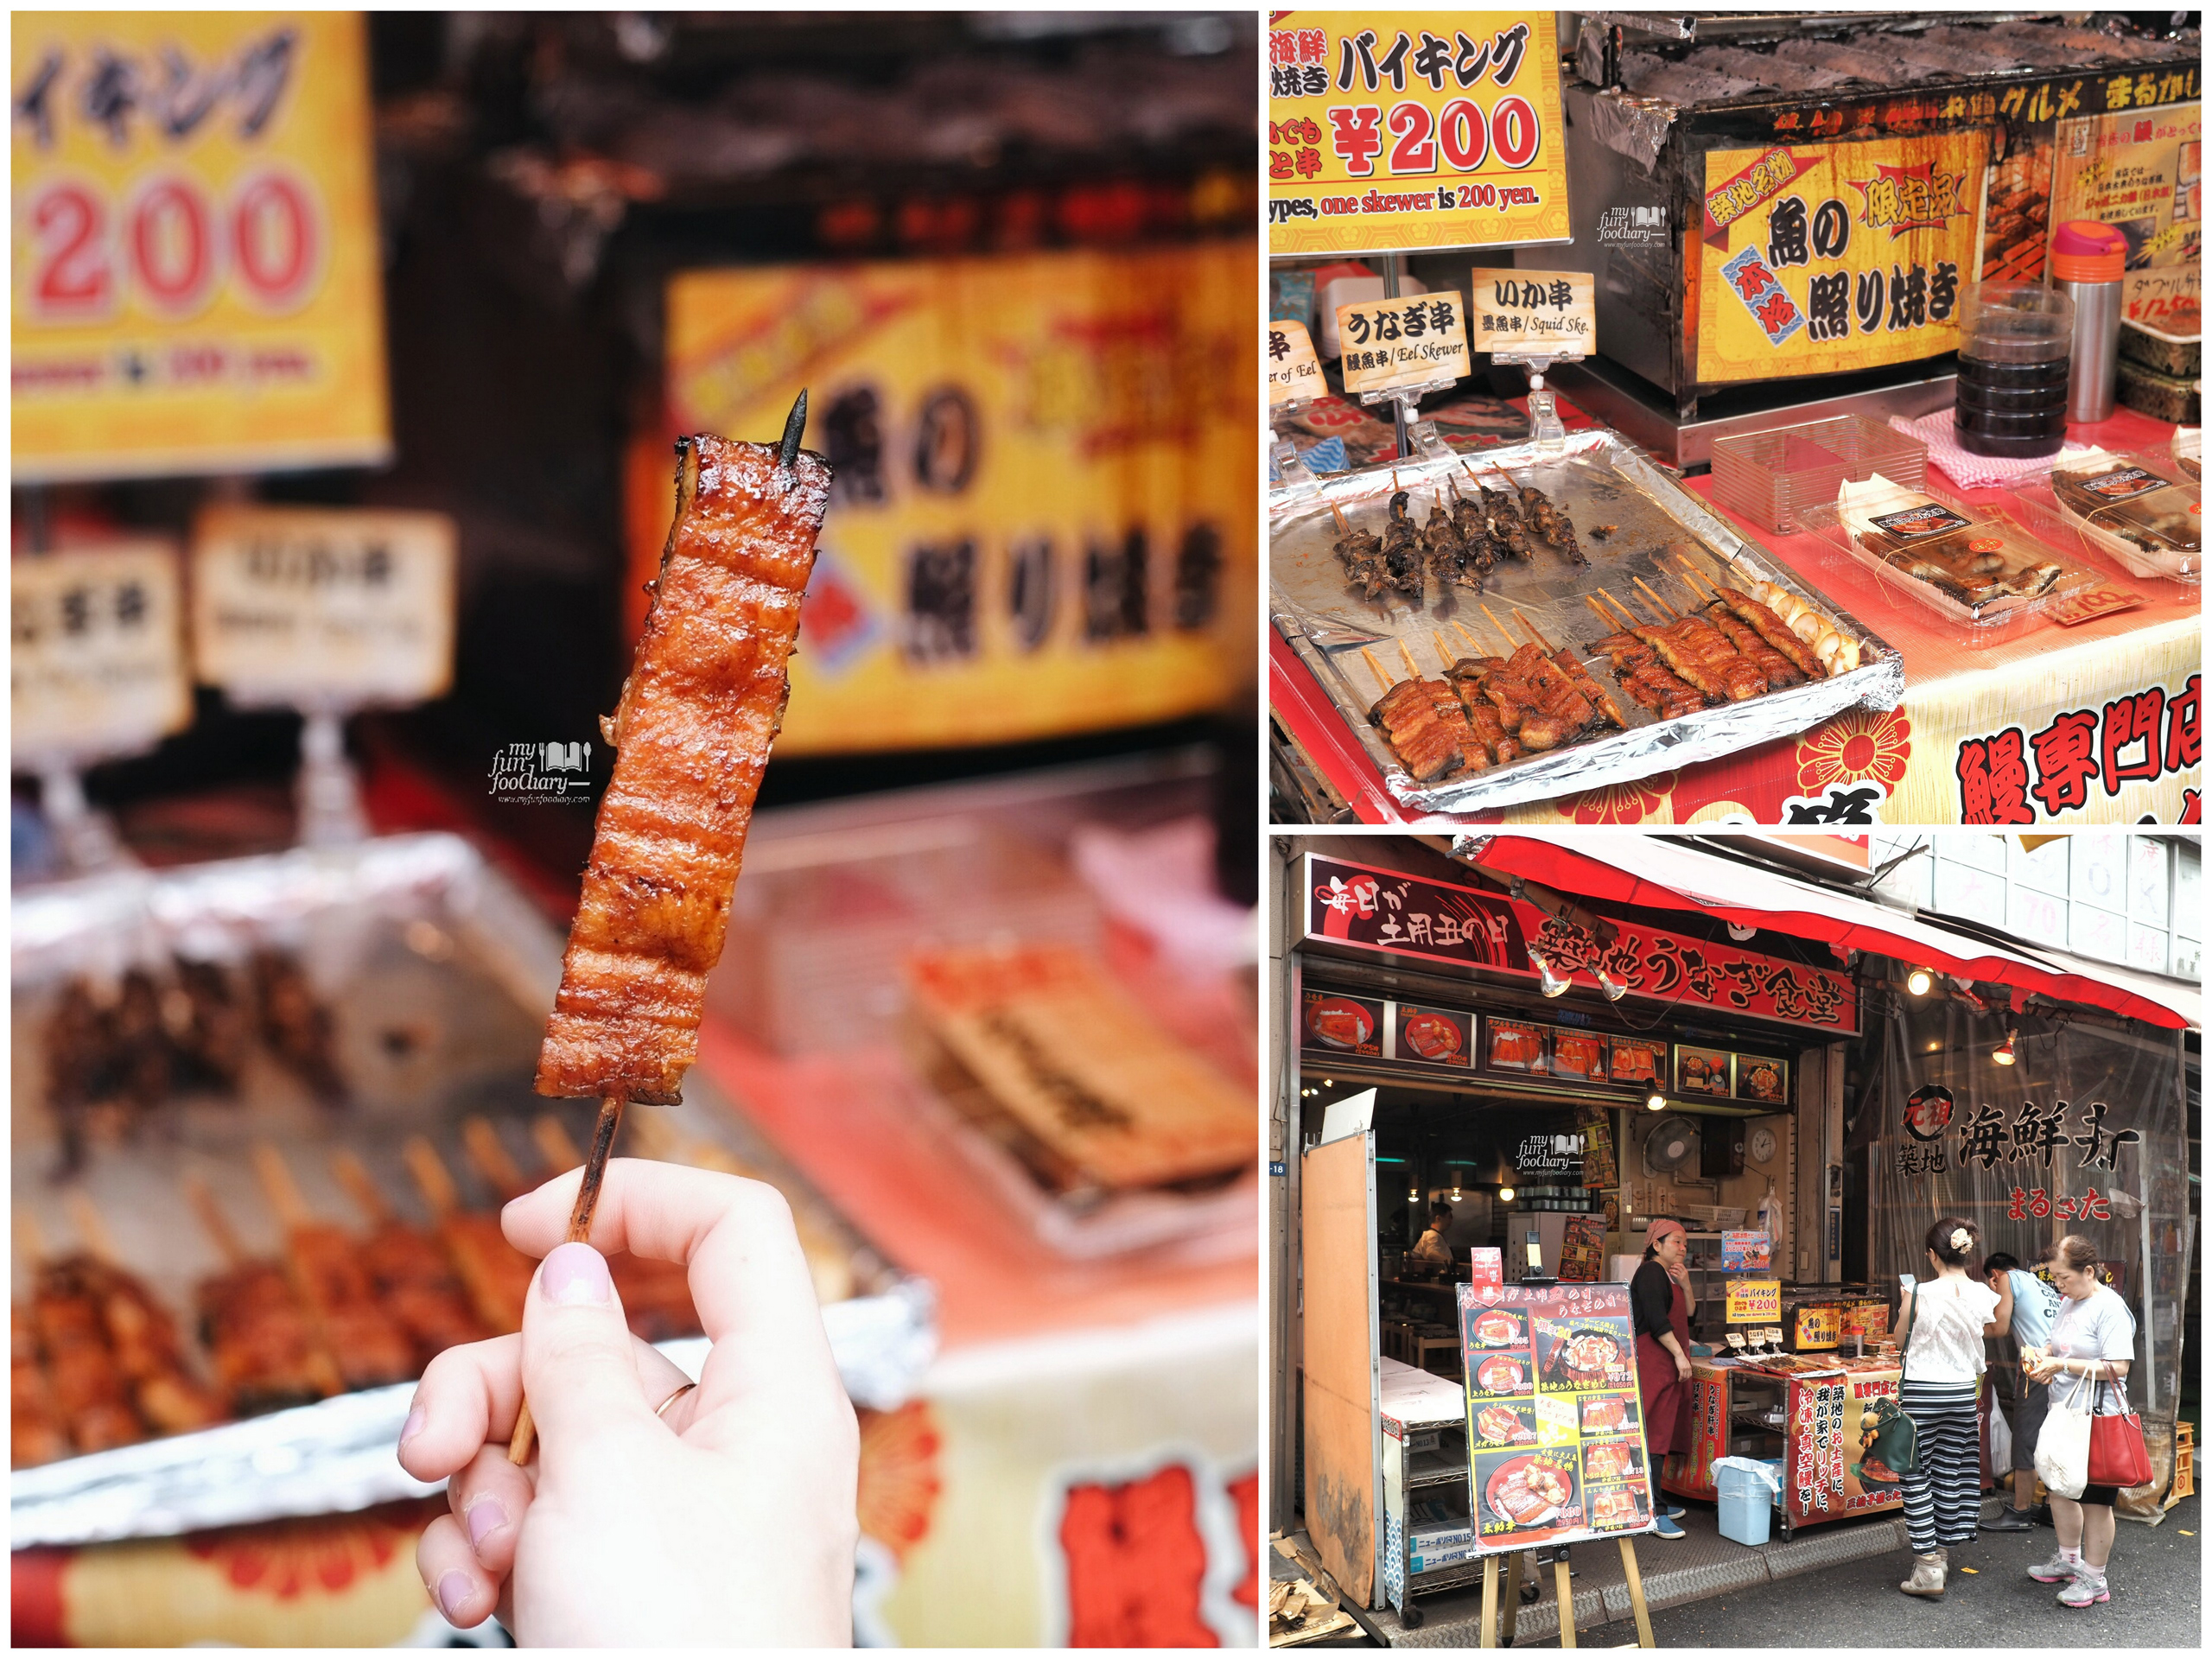 Grilled Eel at Tsukiji Market by Myfunfoodiary collage